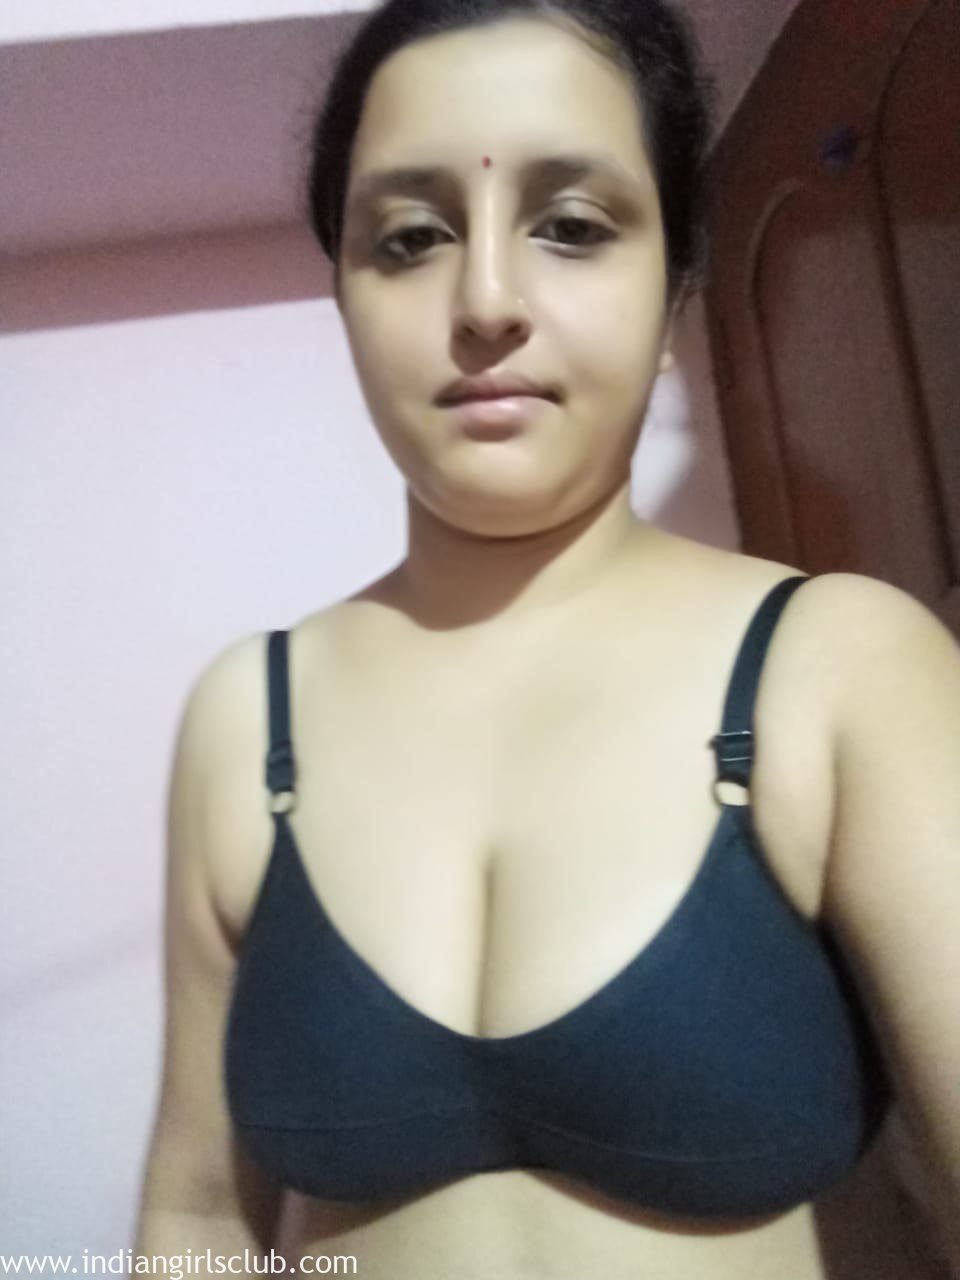 big-tits-bengali-indian-housewife-ready-for-hot-sex-12 - Indian Girls Club  image